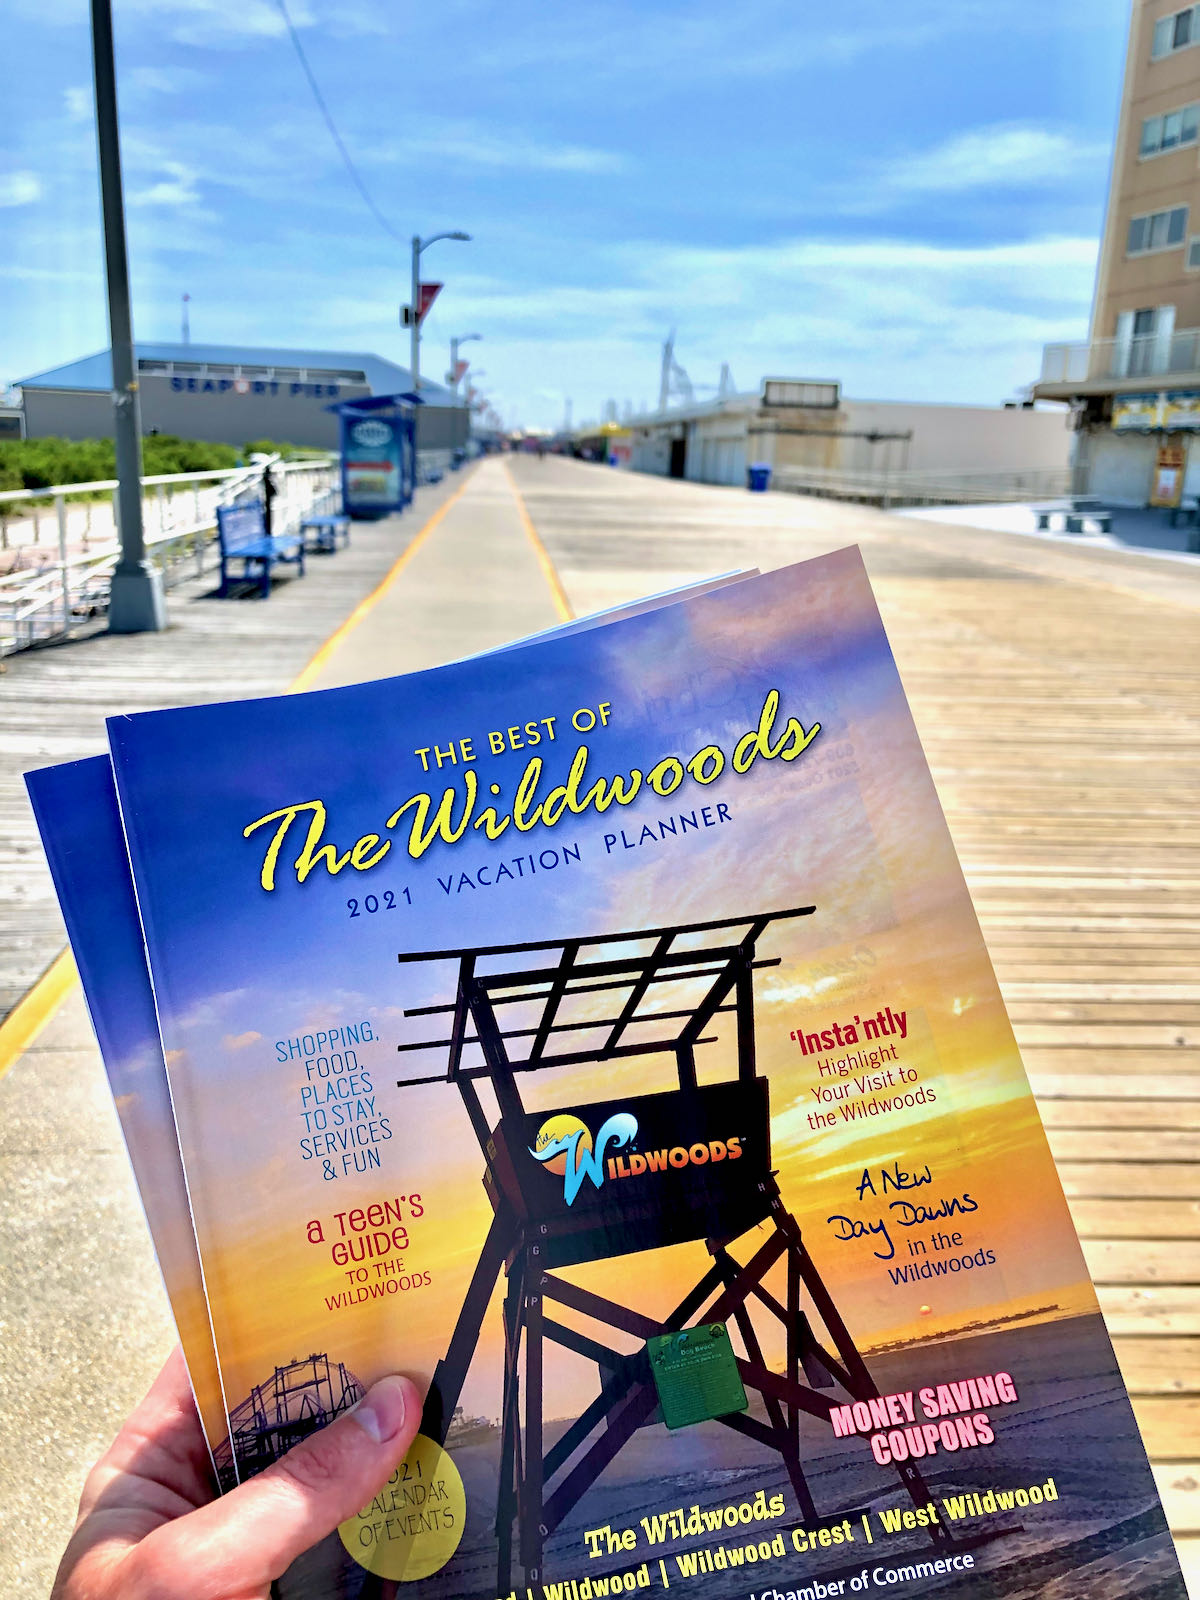 Wildwood Vacation Planner 2021 Cover